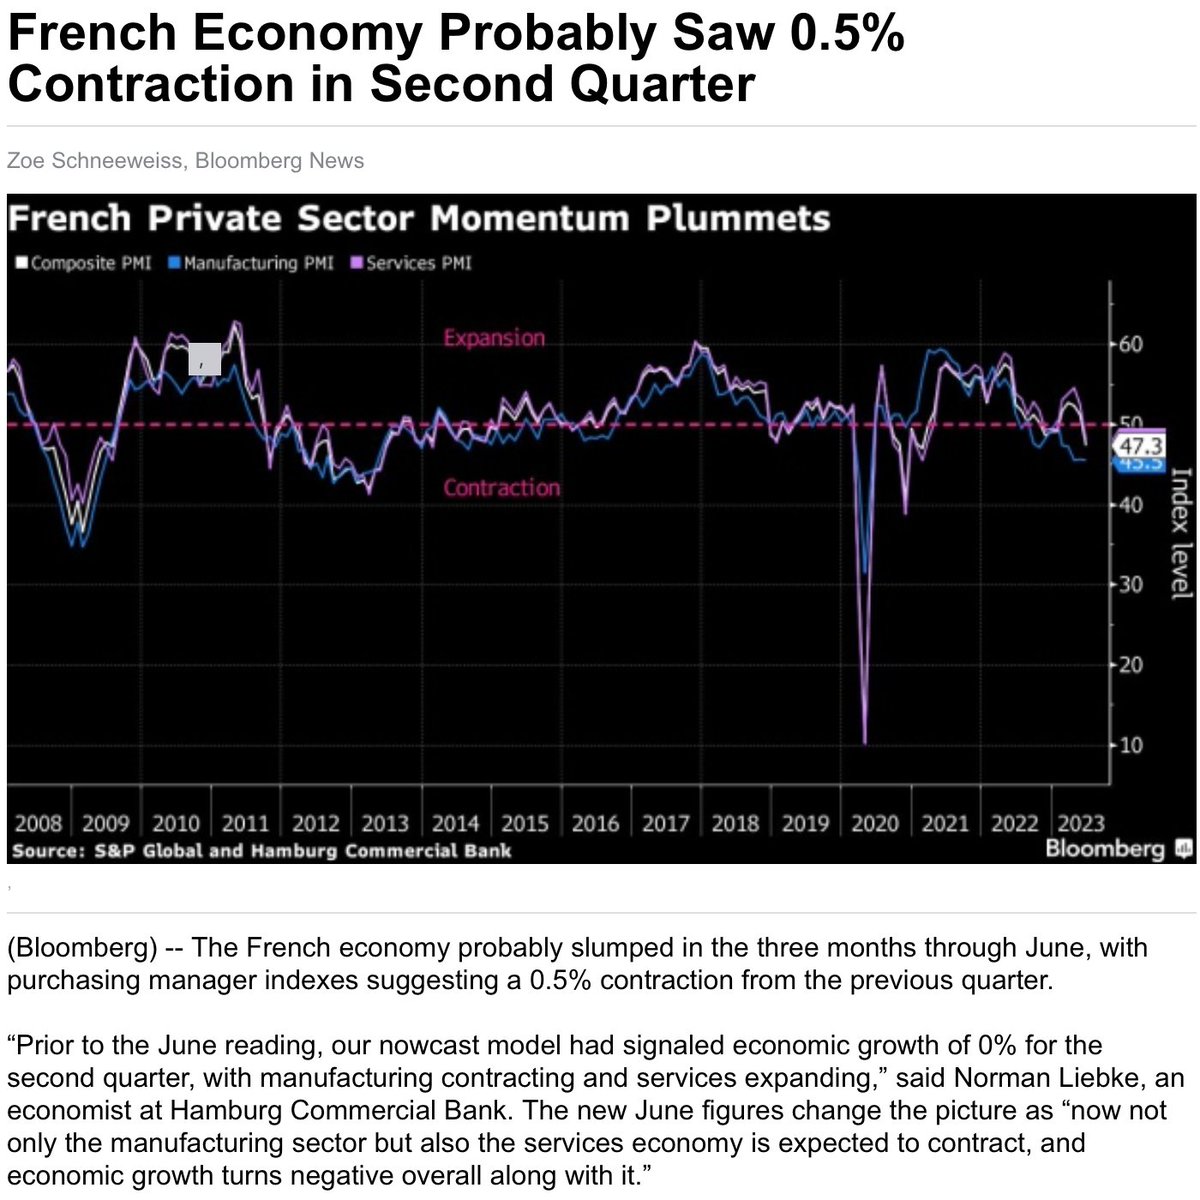 First Germany, now it looks like France...

Many economists, politicians, and journalists like to say this is just a European problem.

We'll see how long this 'American exceptionalism' lasts...

#recession #inflation #stagflation